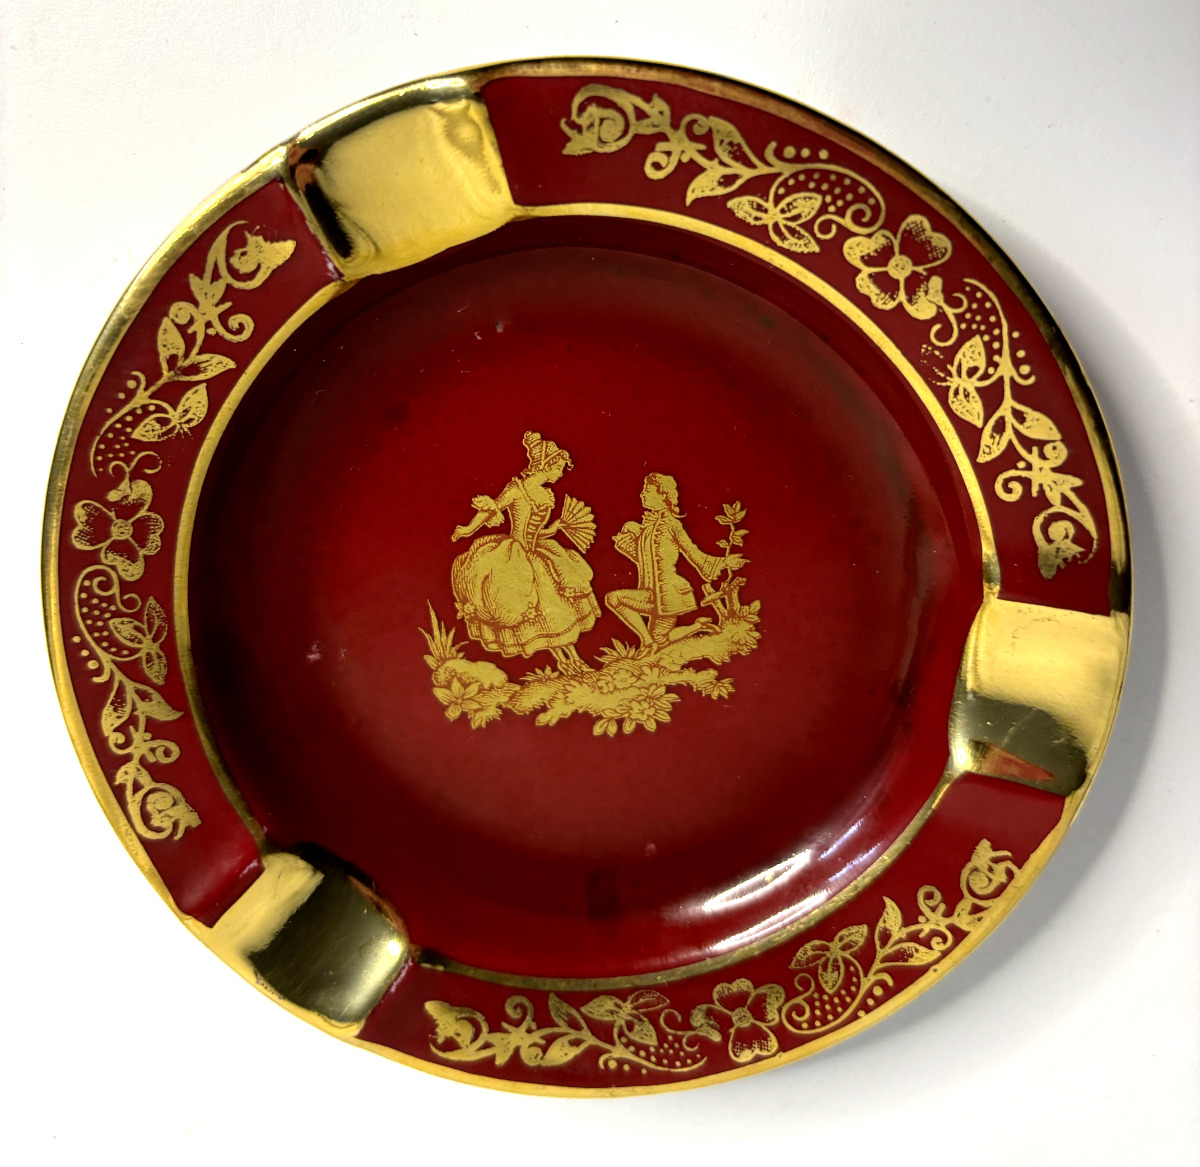 Vintage Limoges France porcelain ashtray in maroon with gold edges and accents,